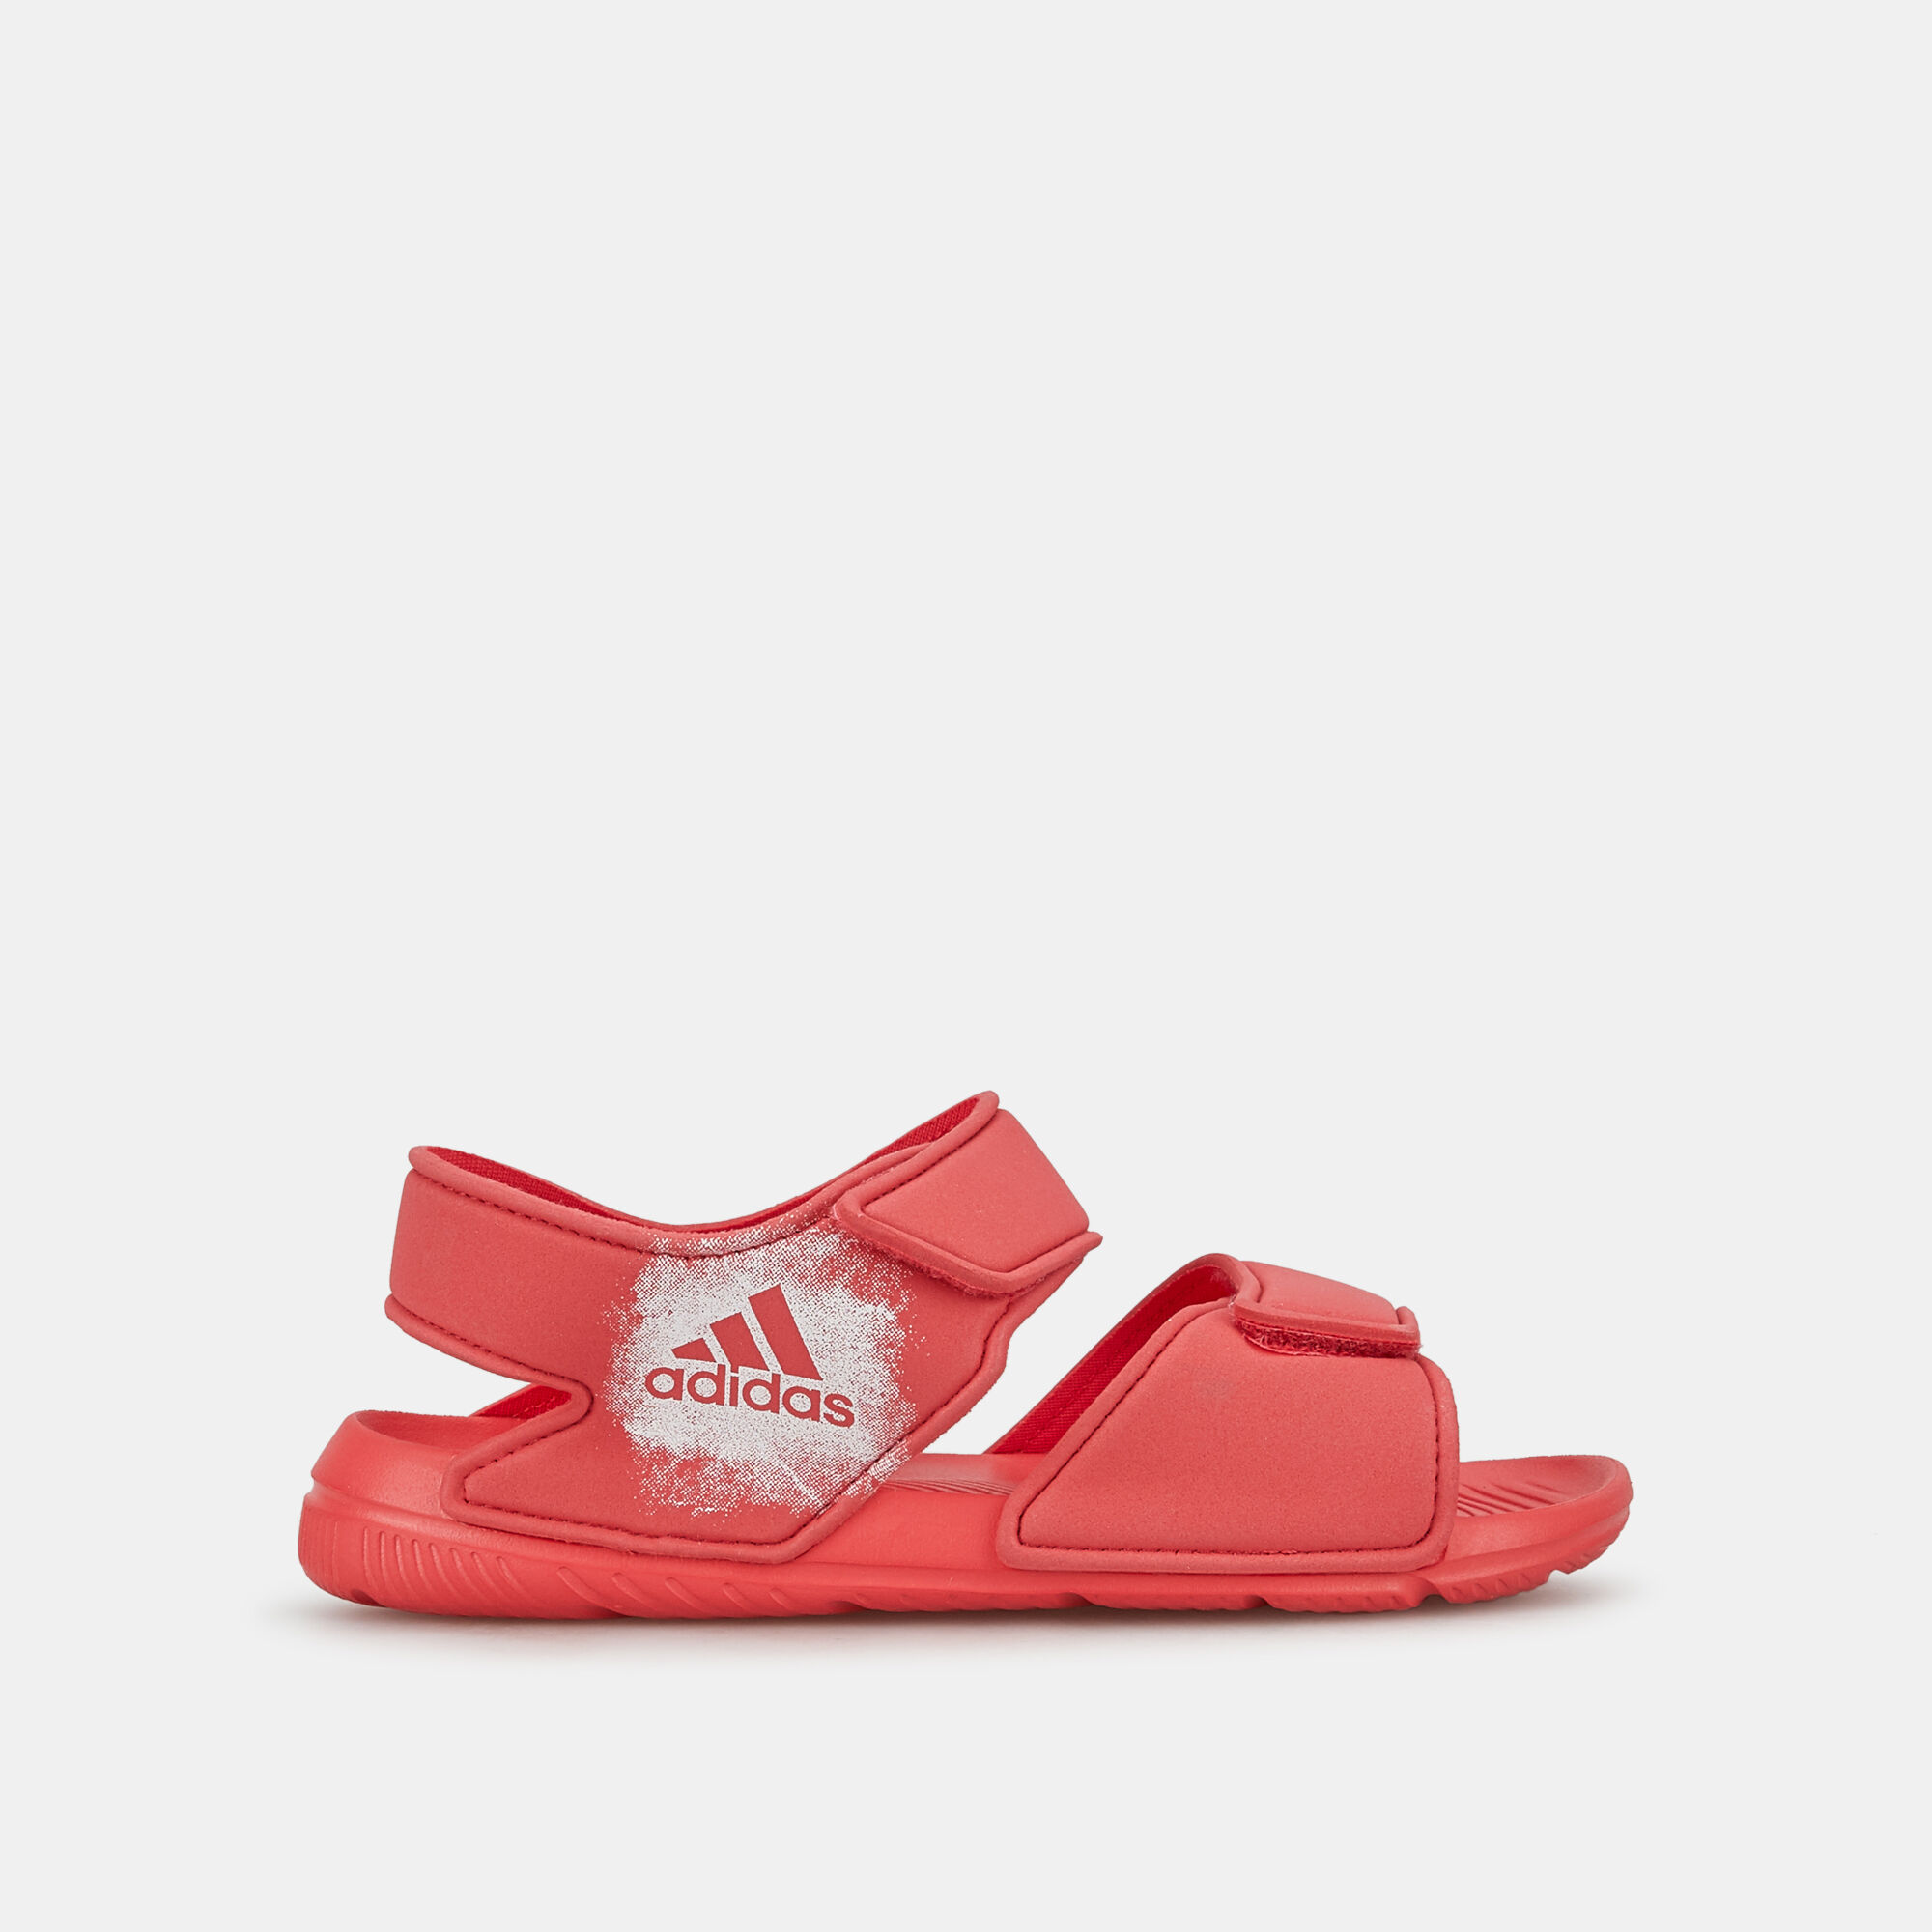 ADIDAS PUDING ADI W Women Grey Sports Sandals - Buy ADIDAS PUDING ADI W  Women Grey Sports Sandals Online at Best Price - Shop Online for Footwears  in India | Flipkart.com